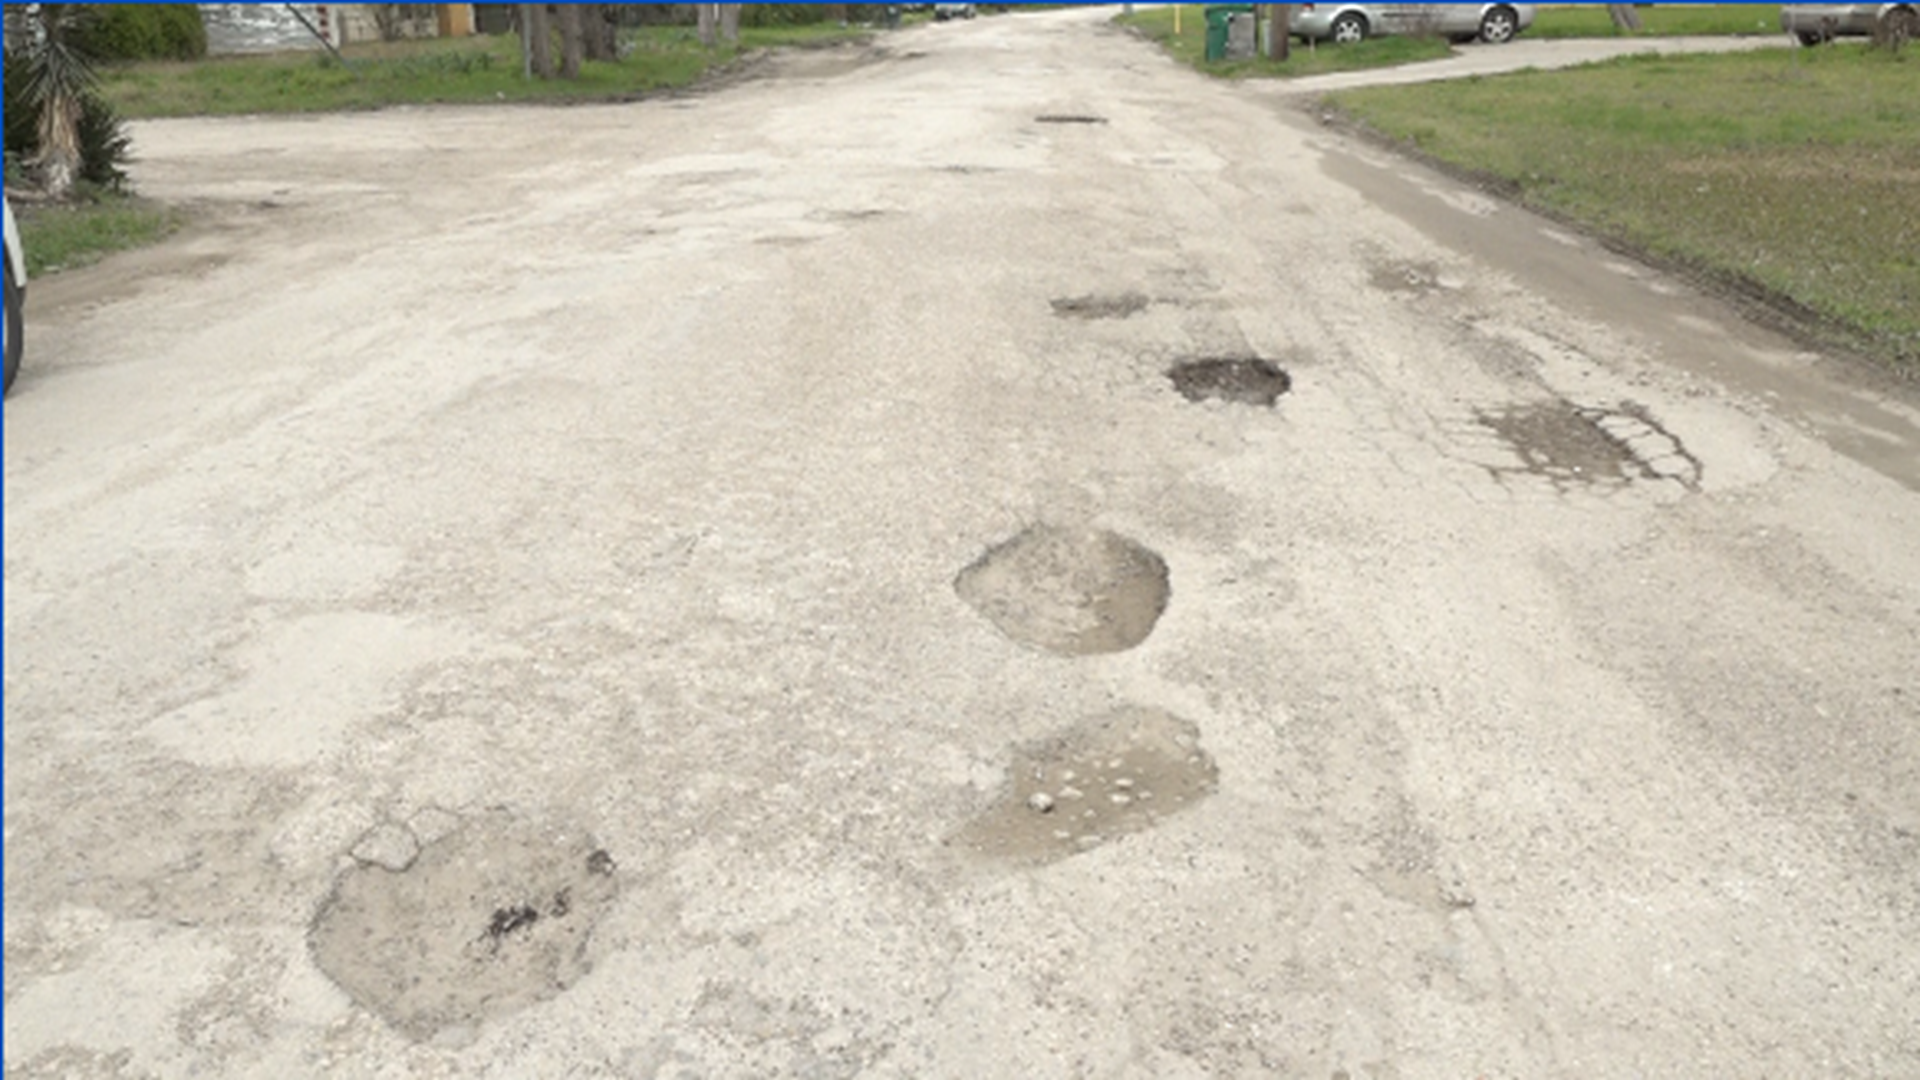 In February, after waiting on the city to make repairs to the roads, some residents took it upon themselves to fix them.